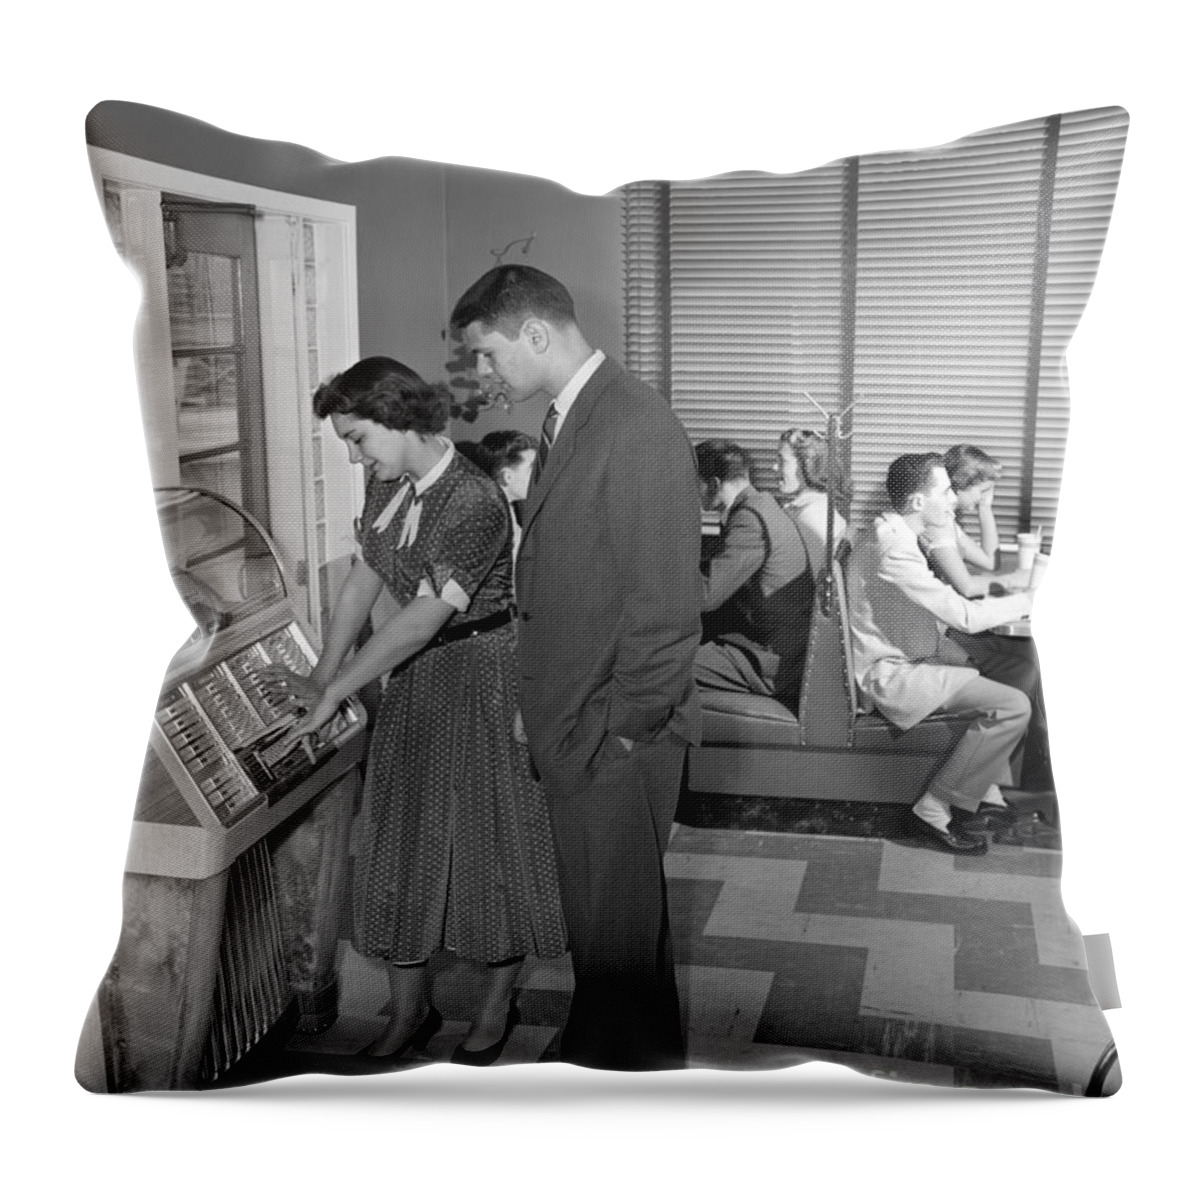 1950s Throw Pillow featuring the photograph Teen Couple Playing Jukebox, C. 1950s by H. Armstrong Roberts/ClassicStock